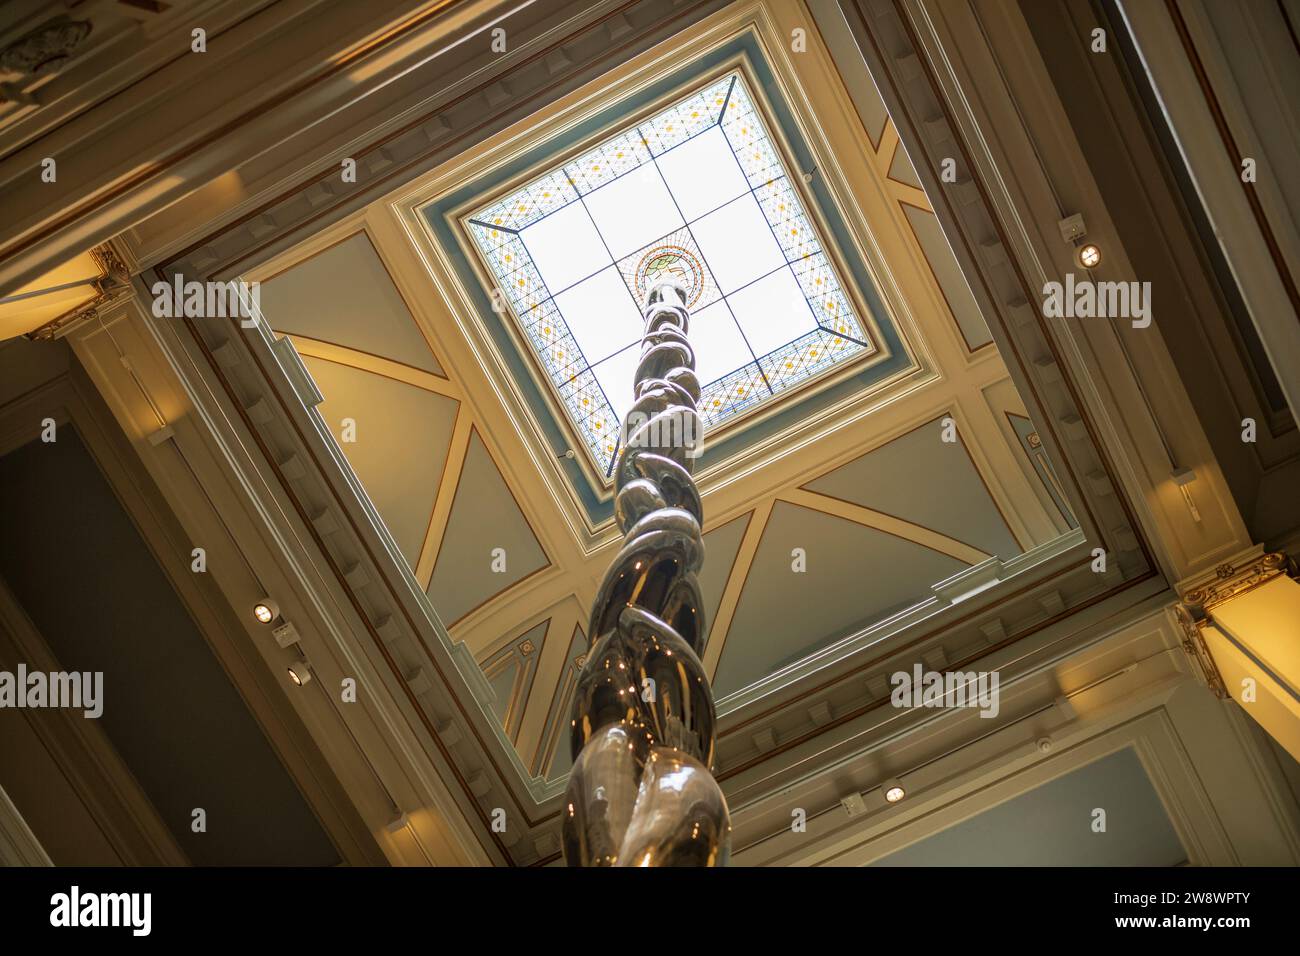 Bergen, Norway, June 29, 2023: Art installations or sculptures on display at the KODE Art Museums of Bergen, one of Scandinavia's largest museums for Stock Photo